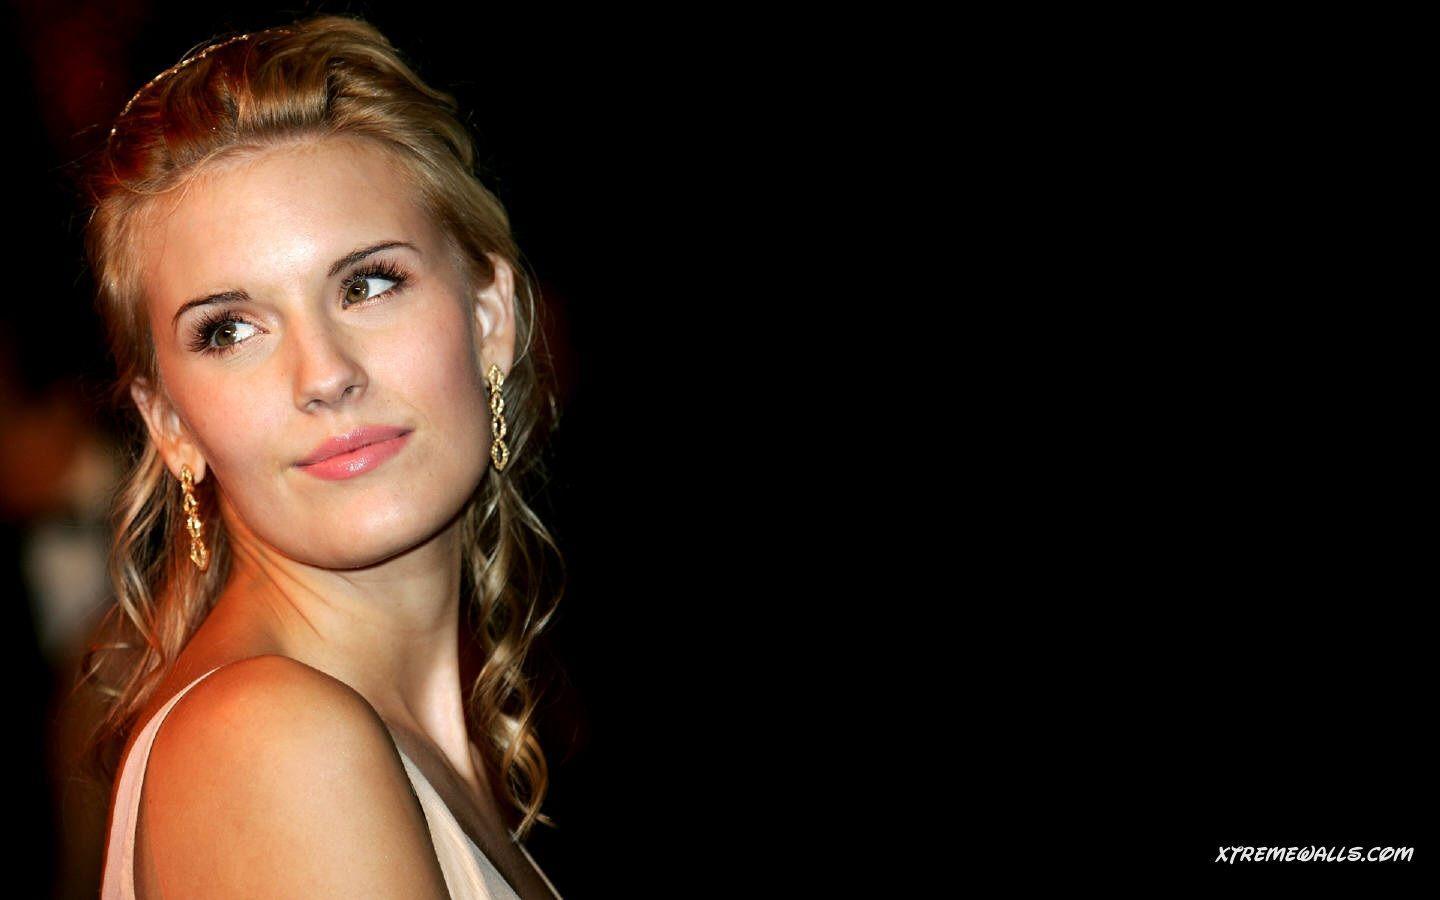 Maggie Grace 1440x900 Wallpaper (High Resolution Picture)